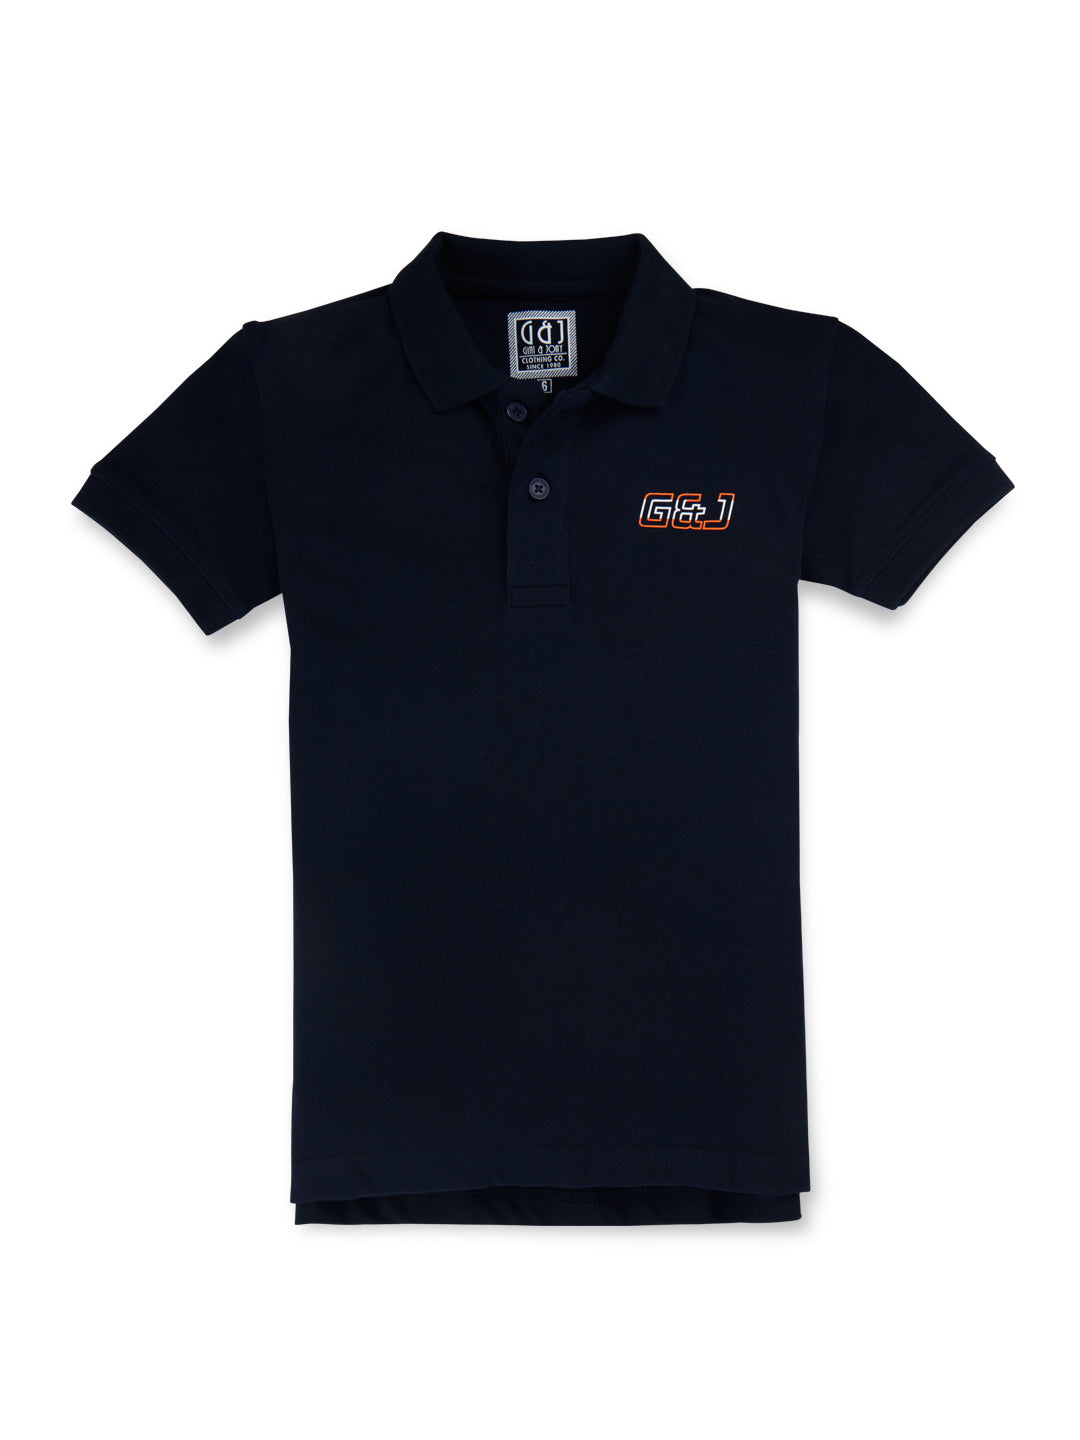 Boys Navy Blue Solid Cotton Half Sleeves Polo T-Shirt